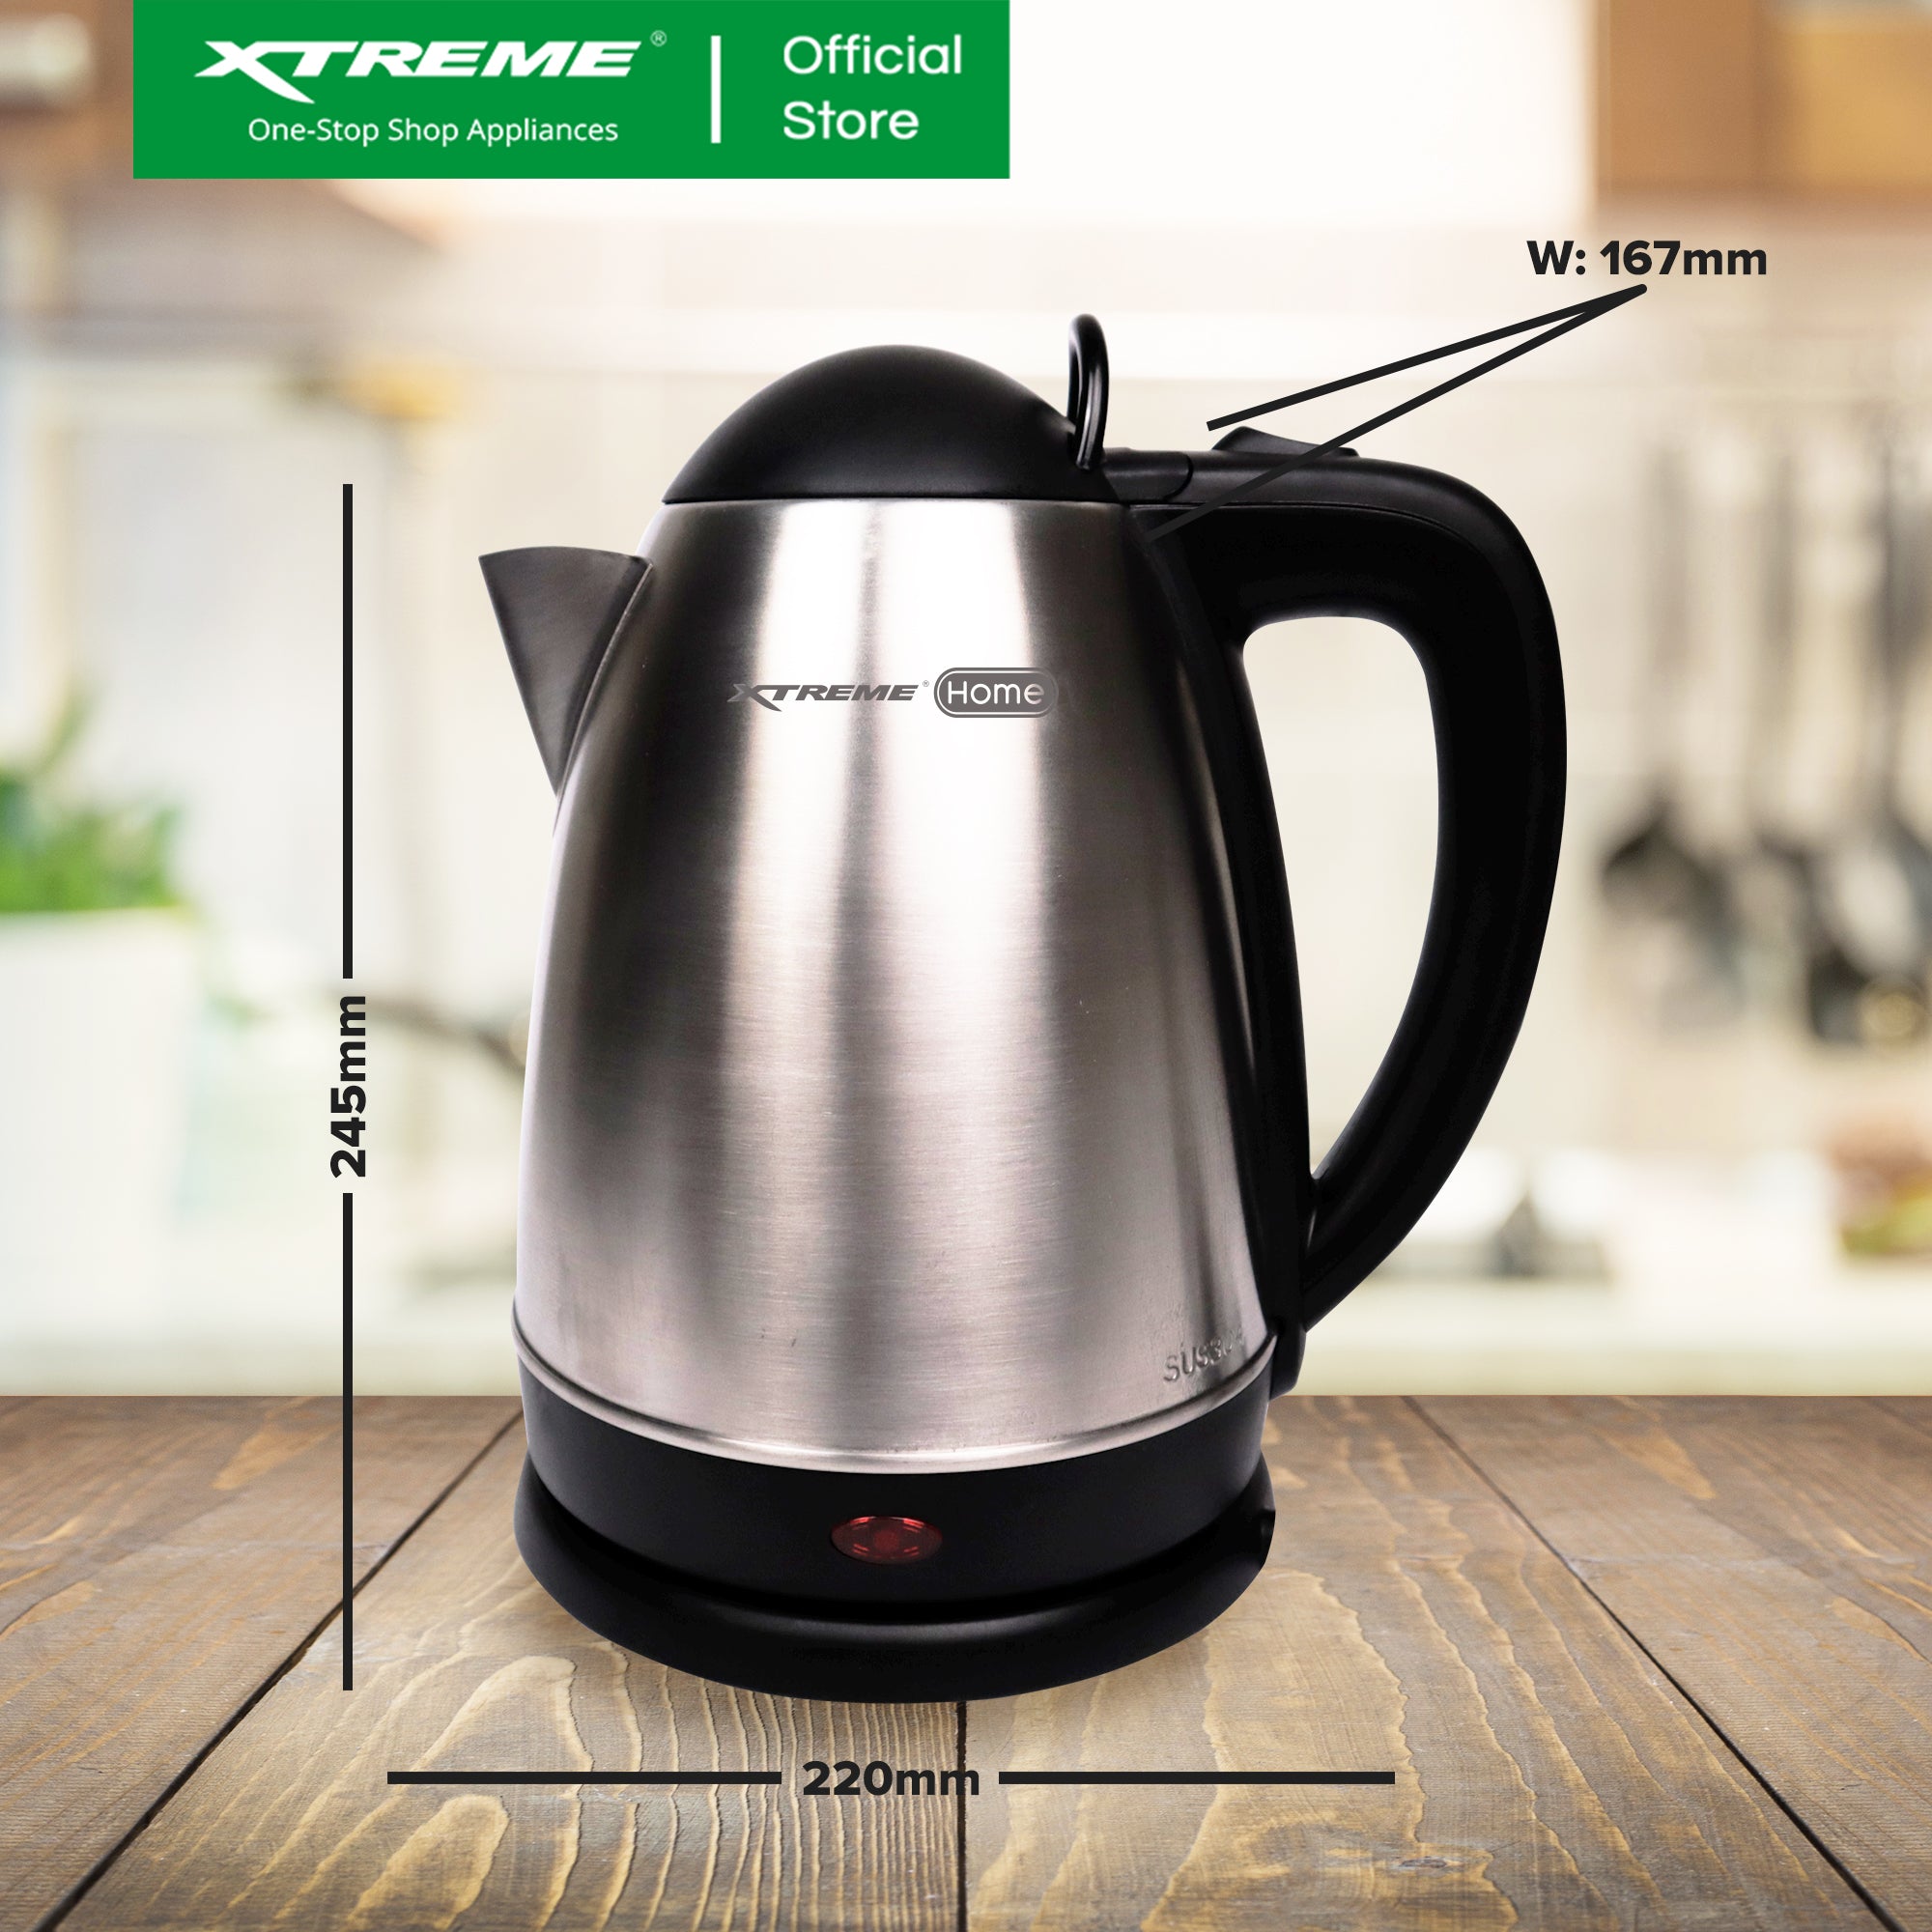 XTREME HOME 1.8L Stainless Steel Electric Kettle Cordless with Automatic Power-off | XH-KT-SS18